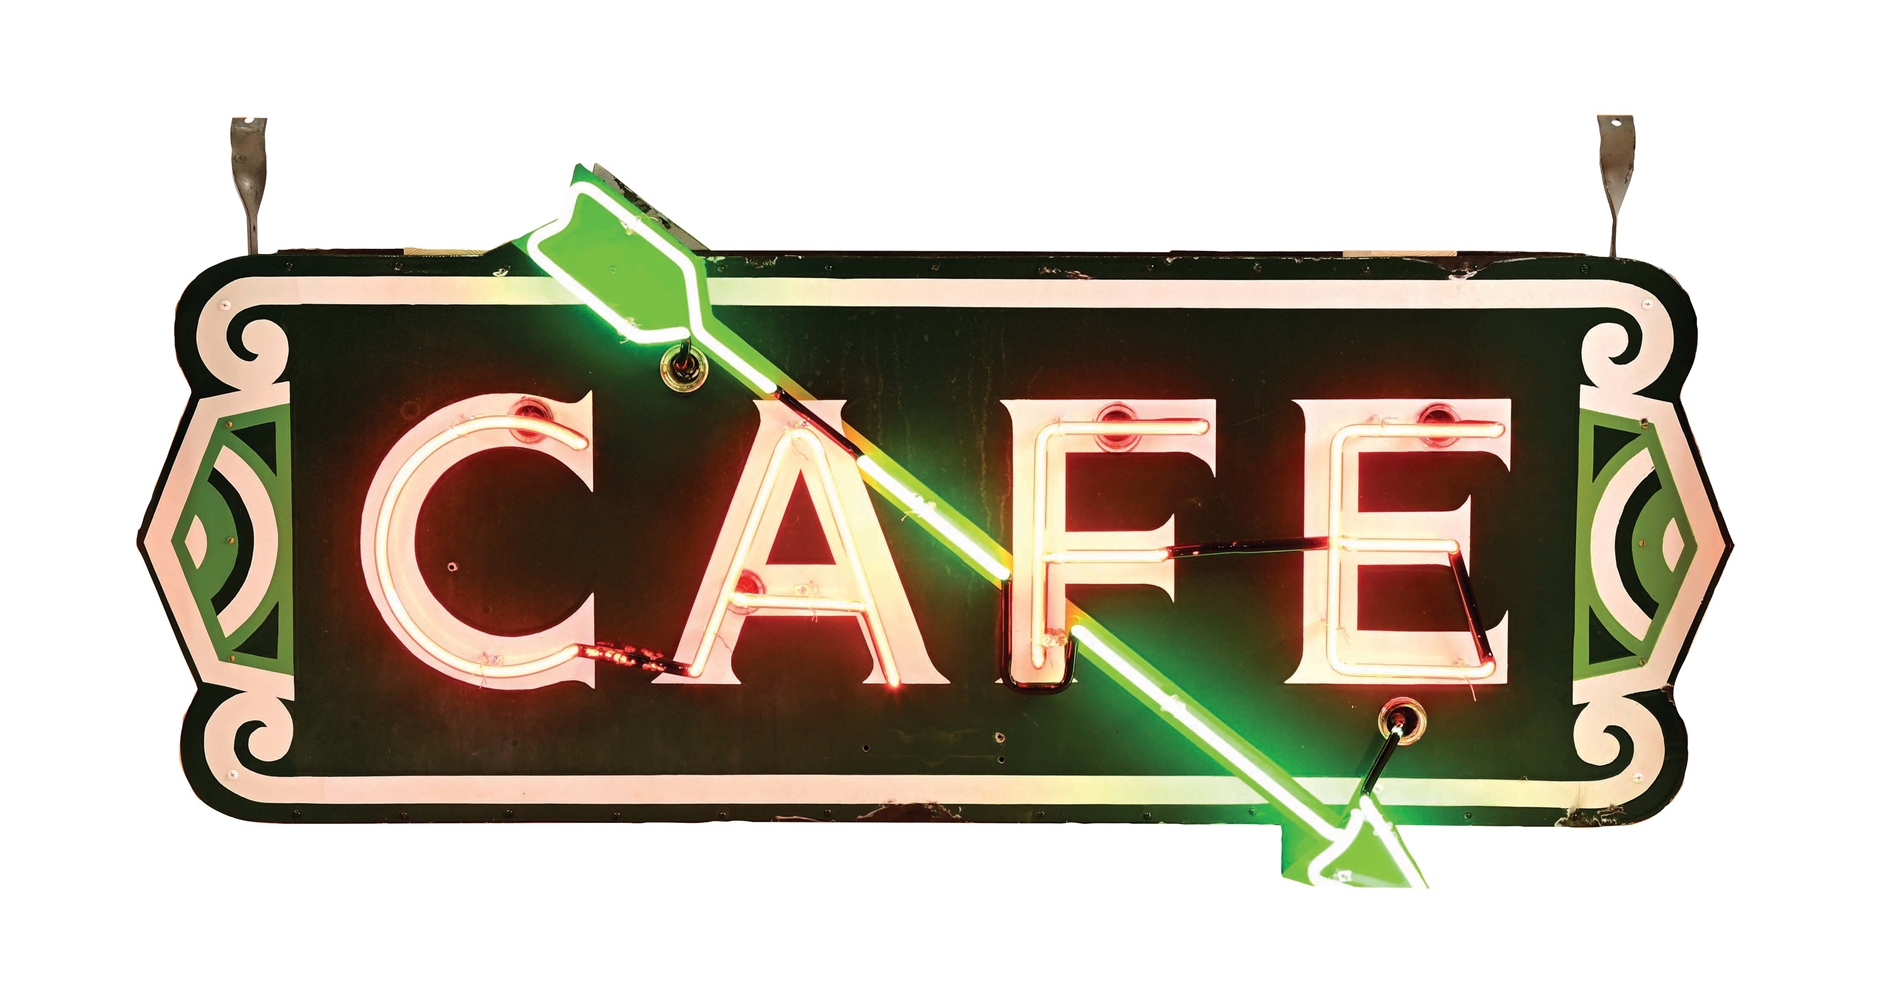 CAFE COMPLETE PORCELAIN NEON SIGN W/ FLASHING ARROW.